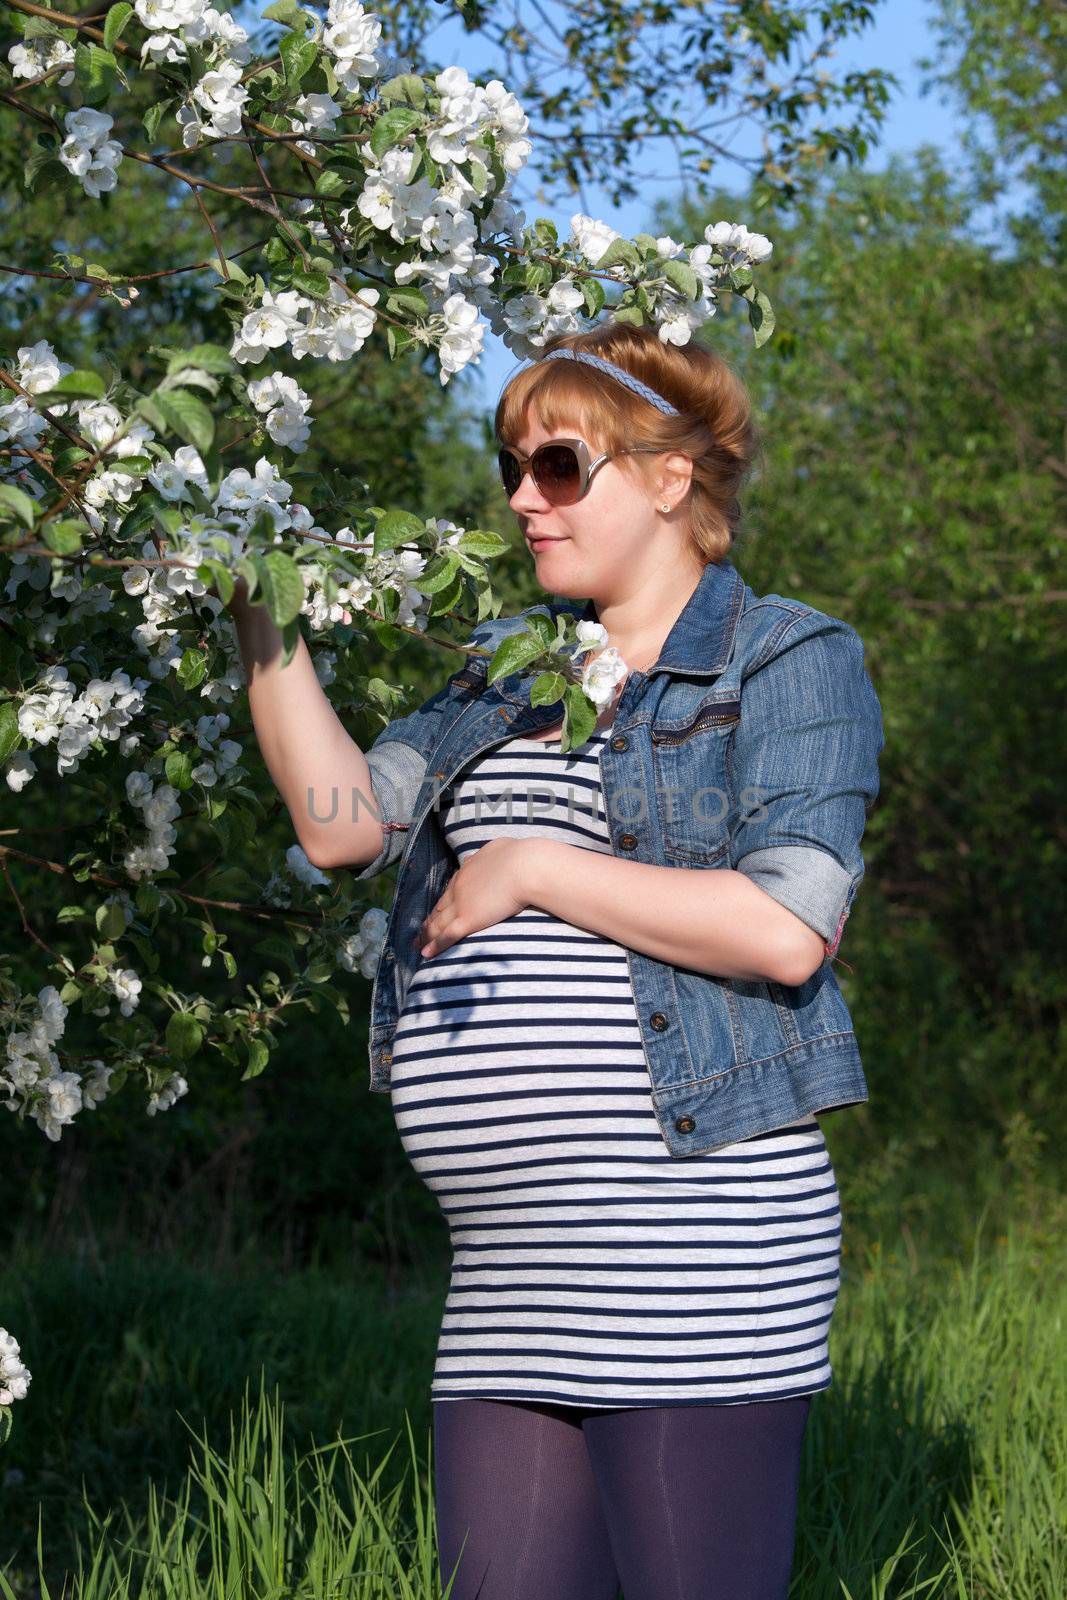 Pregnant woman touching the blooming apple tree